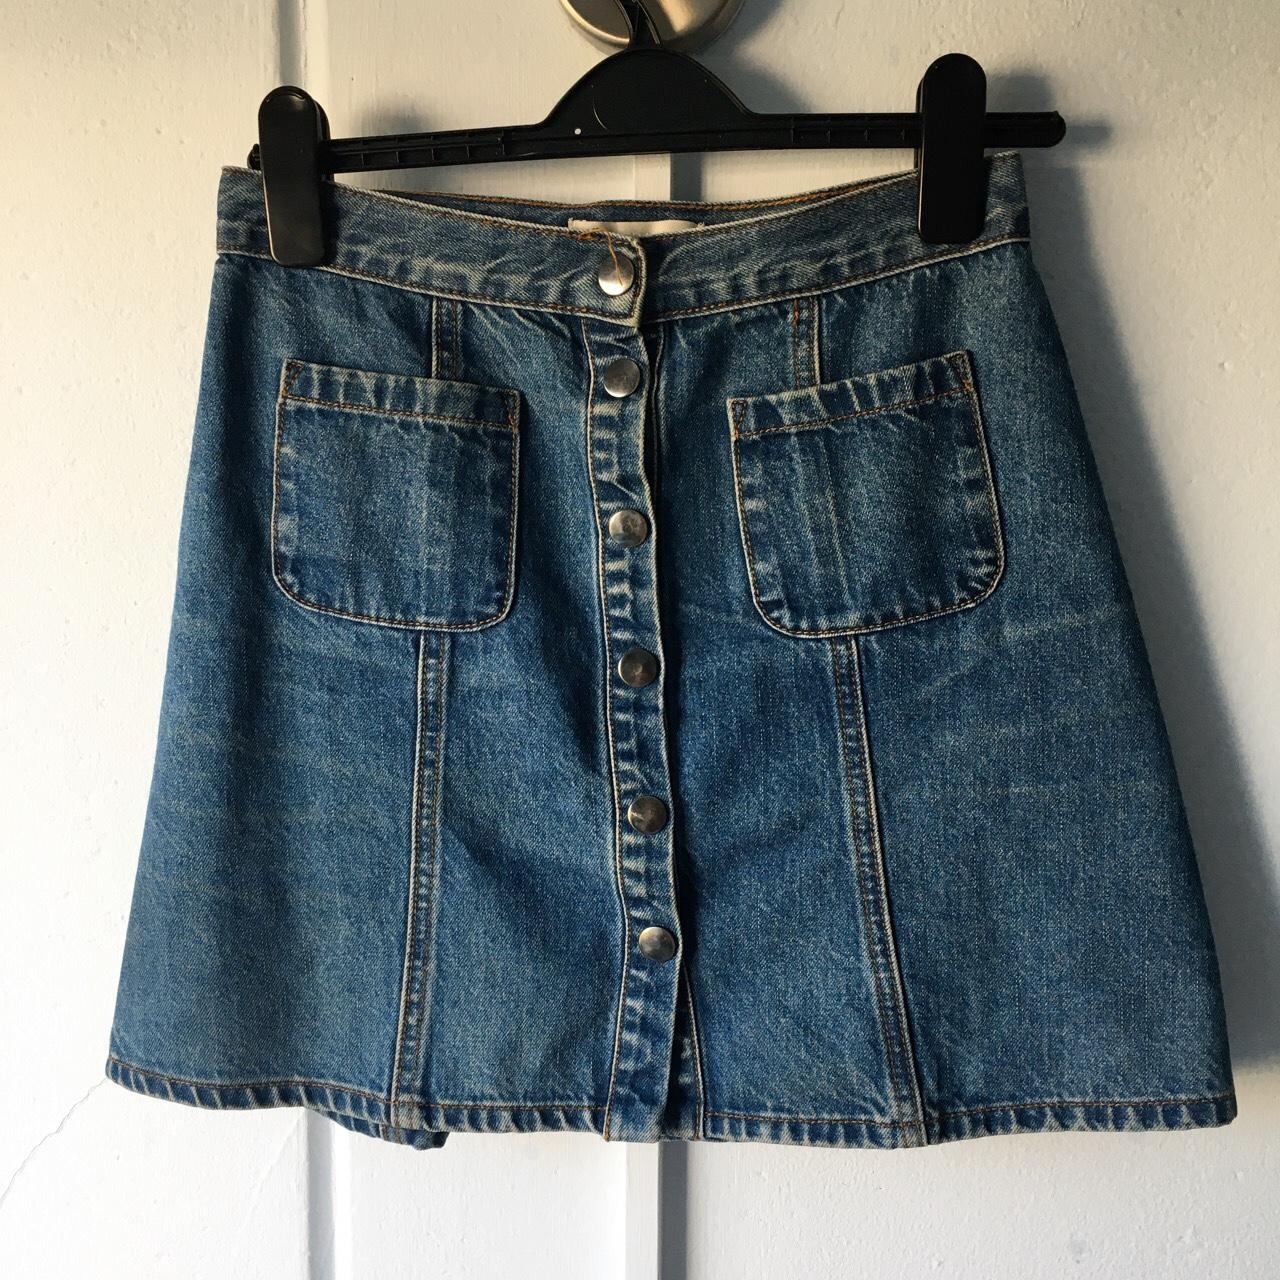 Urban Outfitters Women's Blue and Navy Skirt | Depop